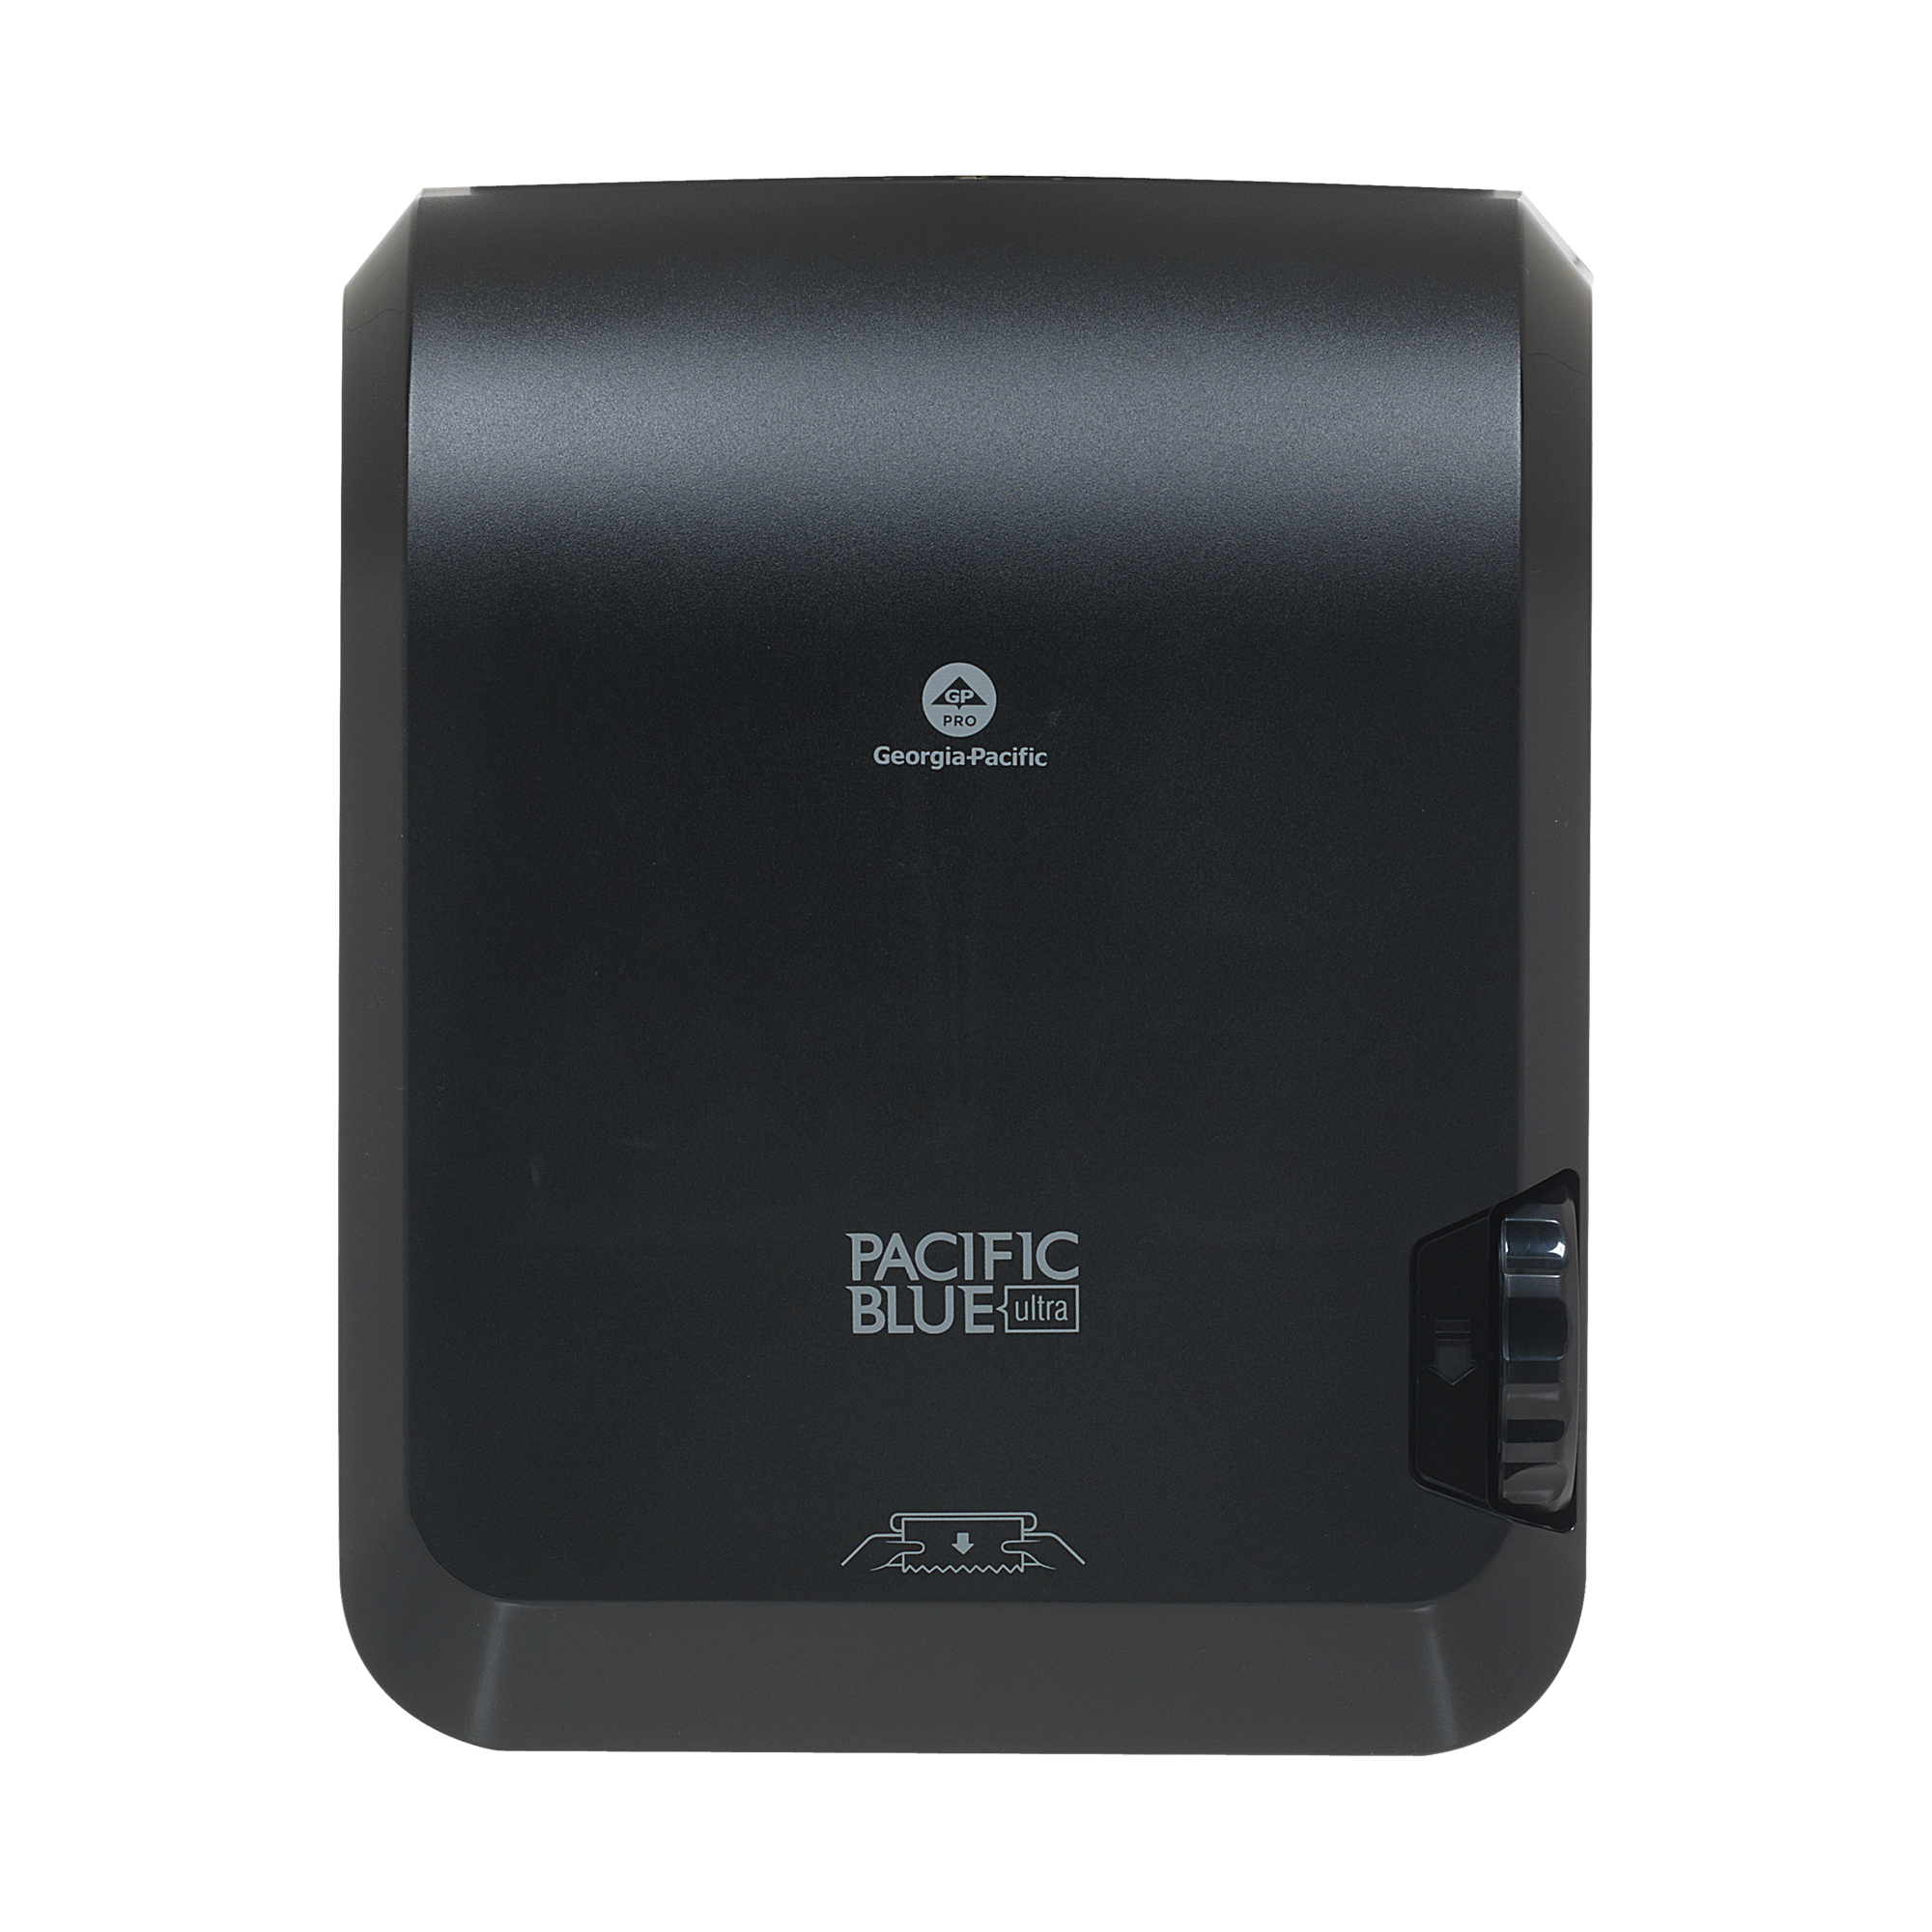 Pacific Blue Ultra™ Mechanical High-Capacity Paper Towel Dispenser By Gp Pro (Georgia-Pacific)